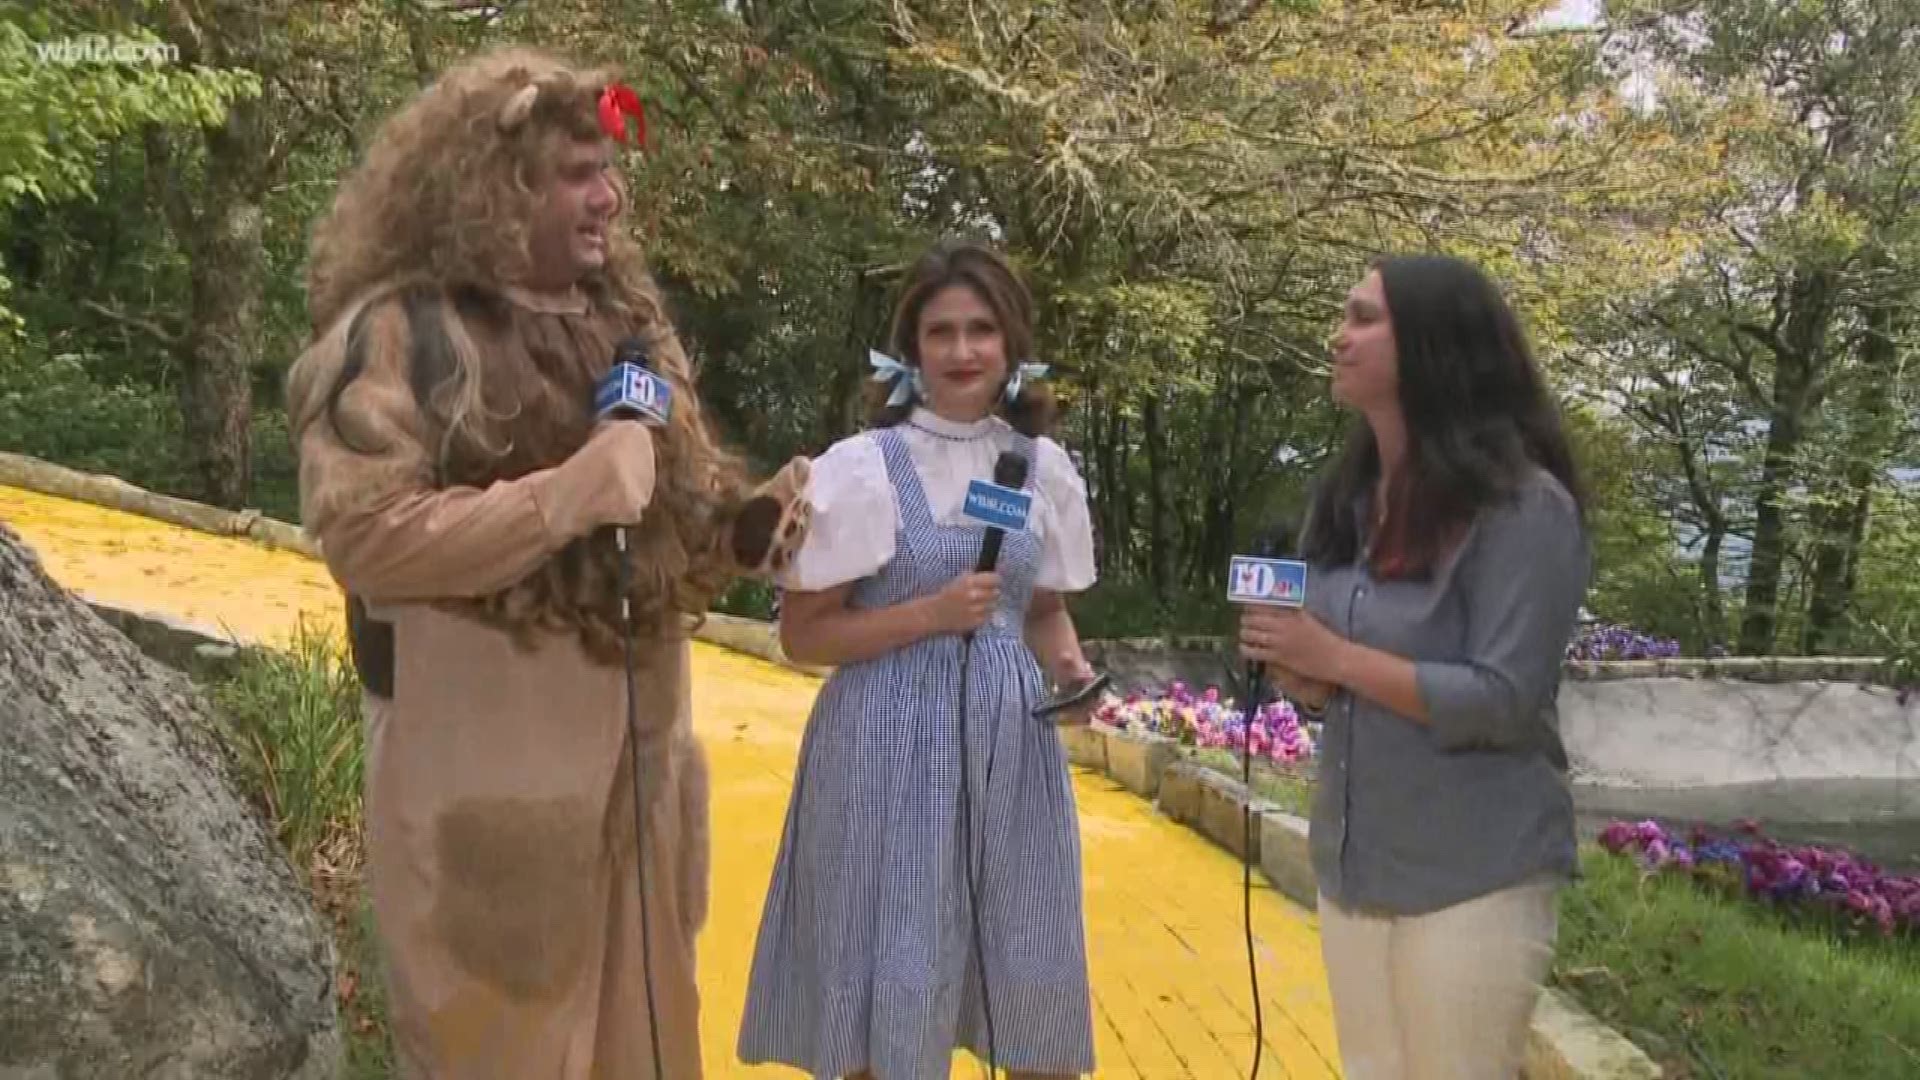 Here's what to expect at the Land of Oz